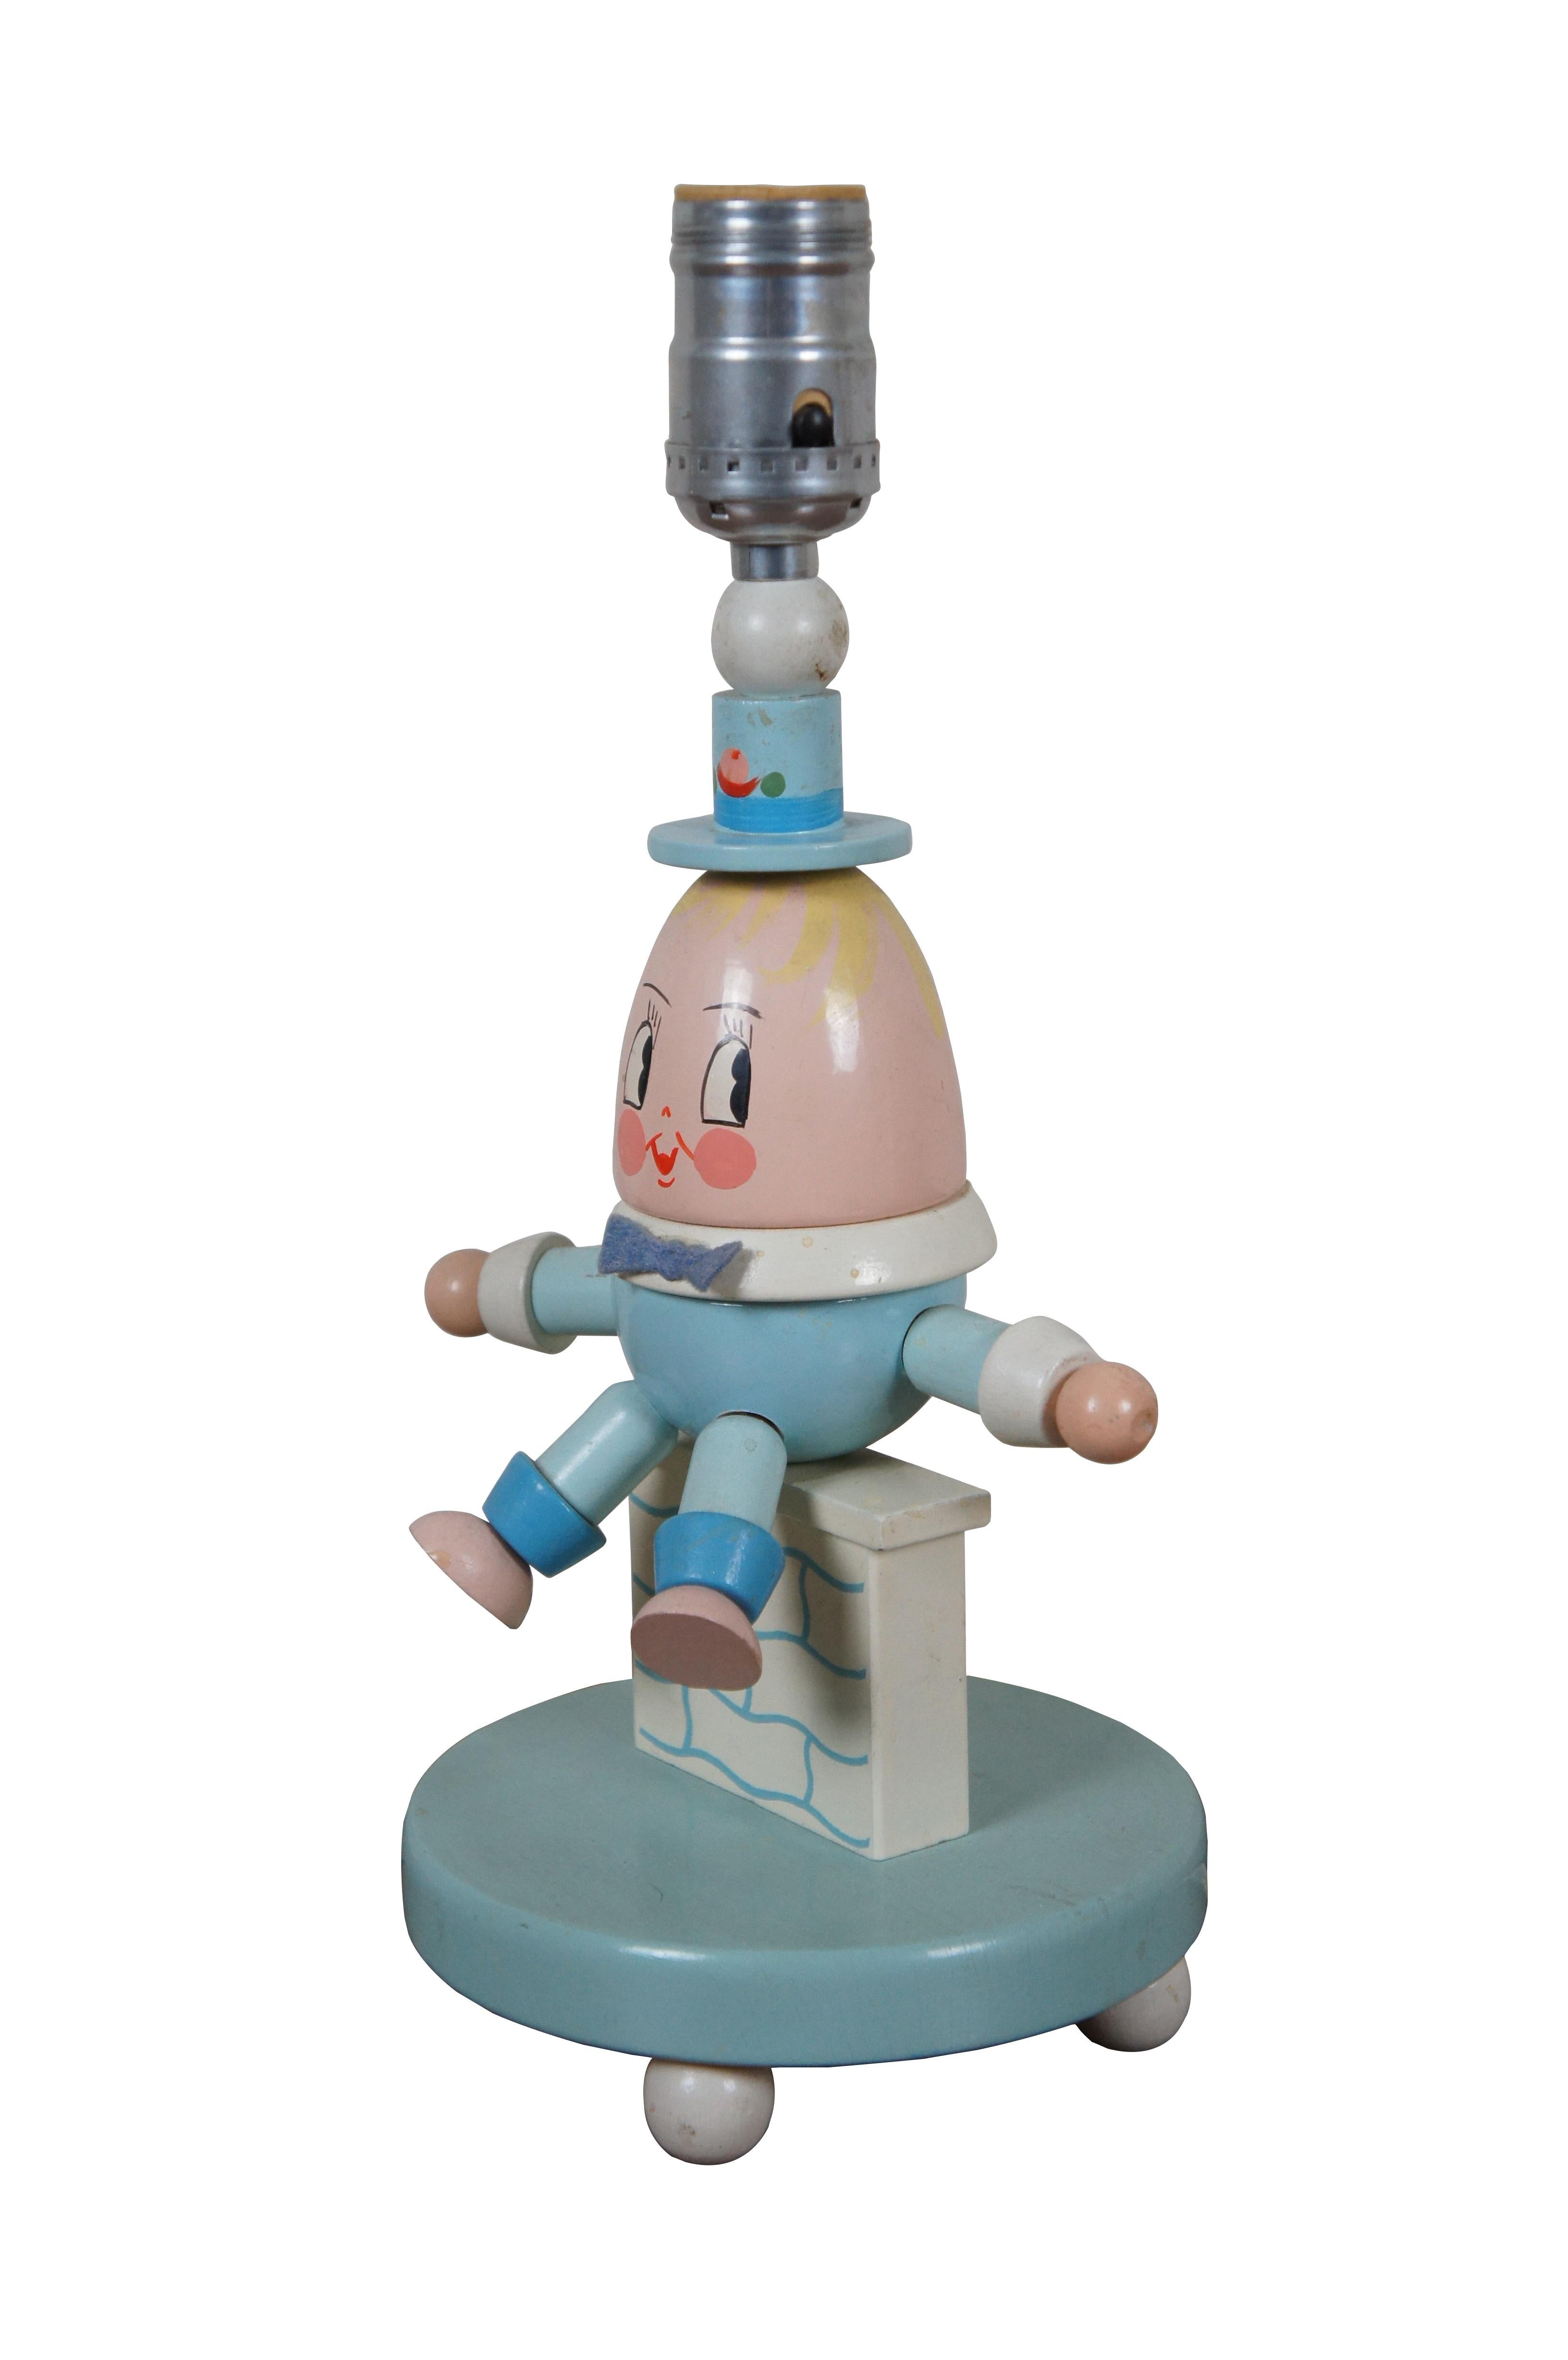 Circa 1960's painted wooden figural table lamp featuring the egg shaped nursery rhyme character Humpty Dumpty, dressed in a powder blue suit and top hat, seated on a white and blue wall. Manufactured by Nursery Plastics Inc.

Dimensions:
6.25